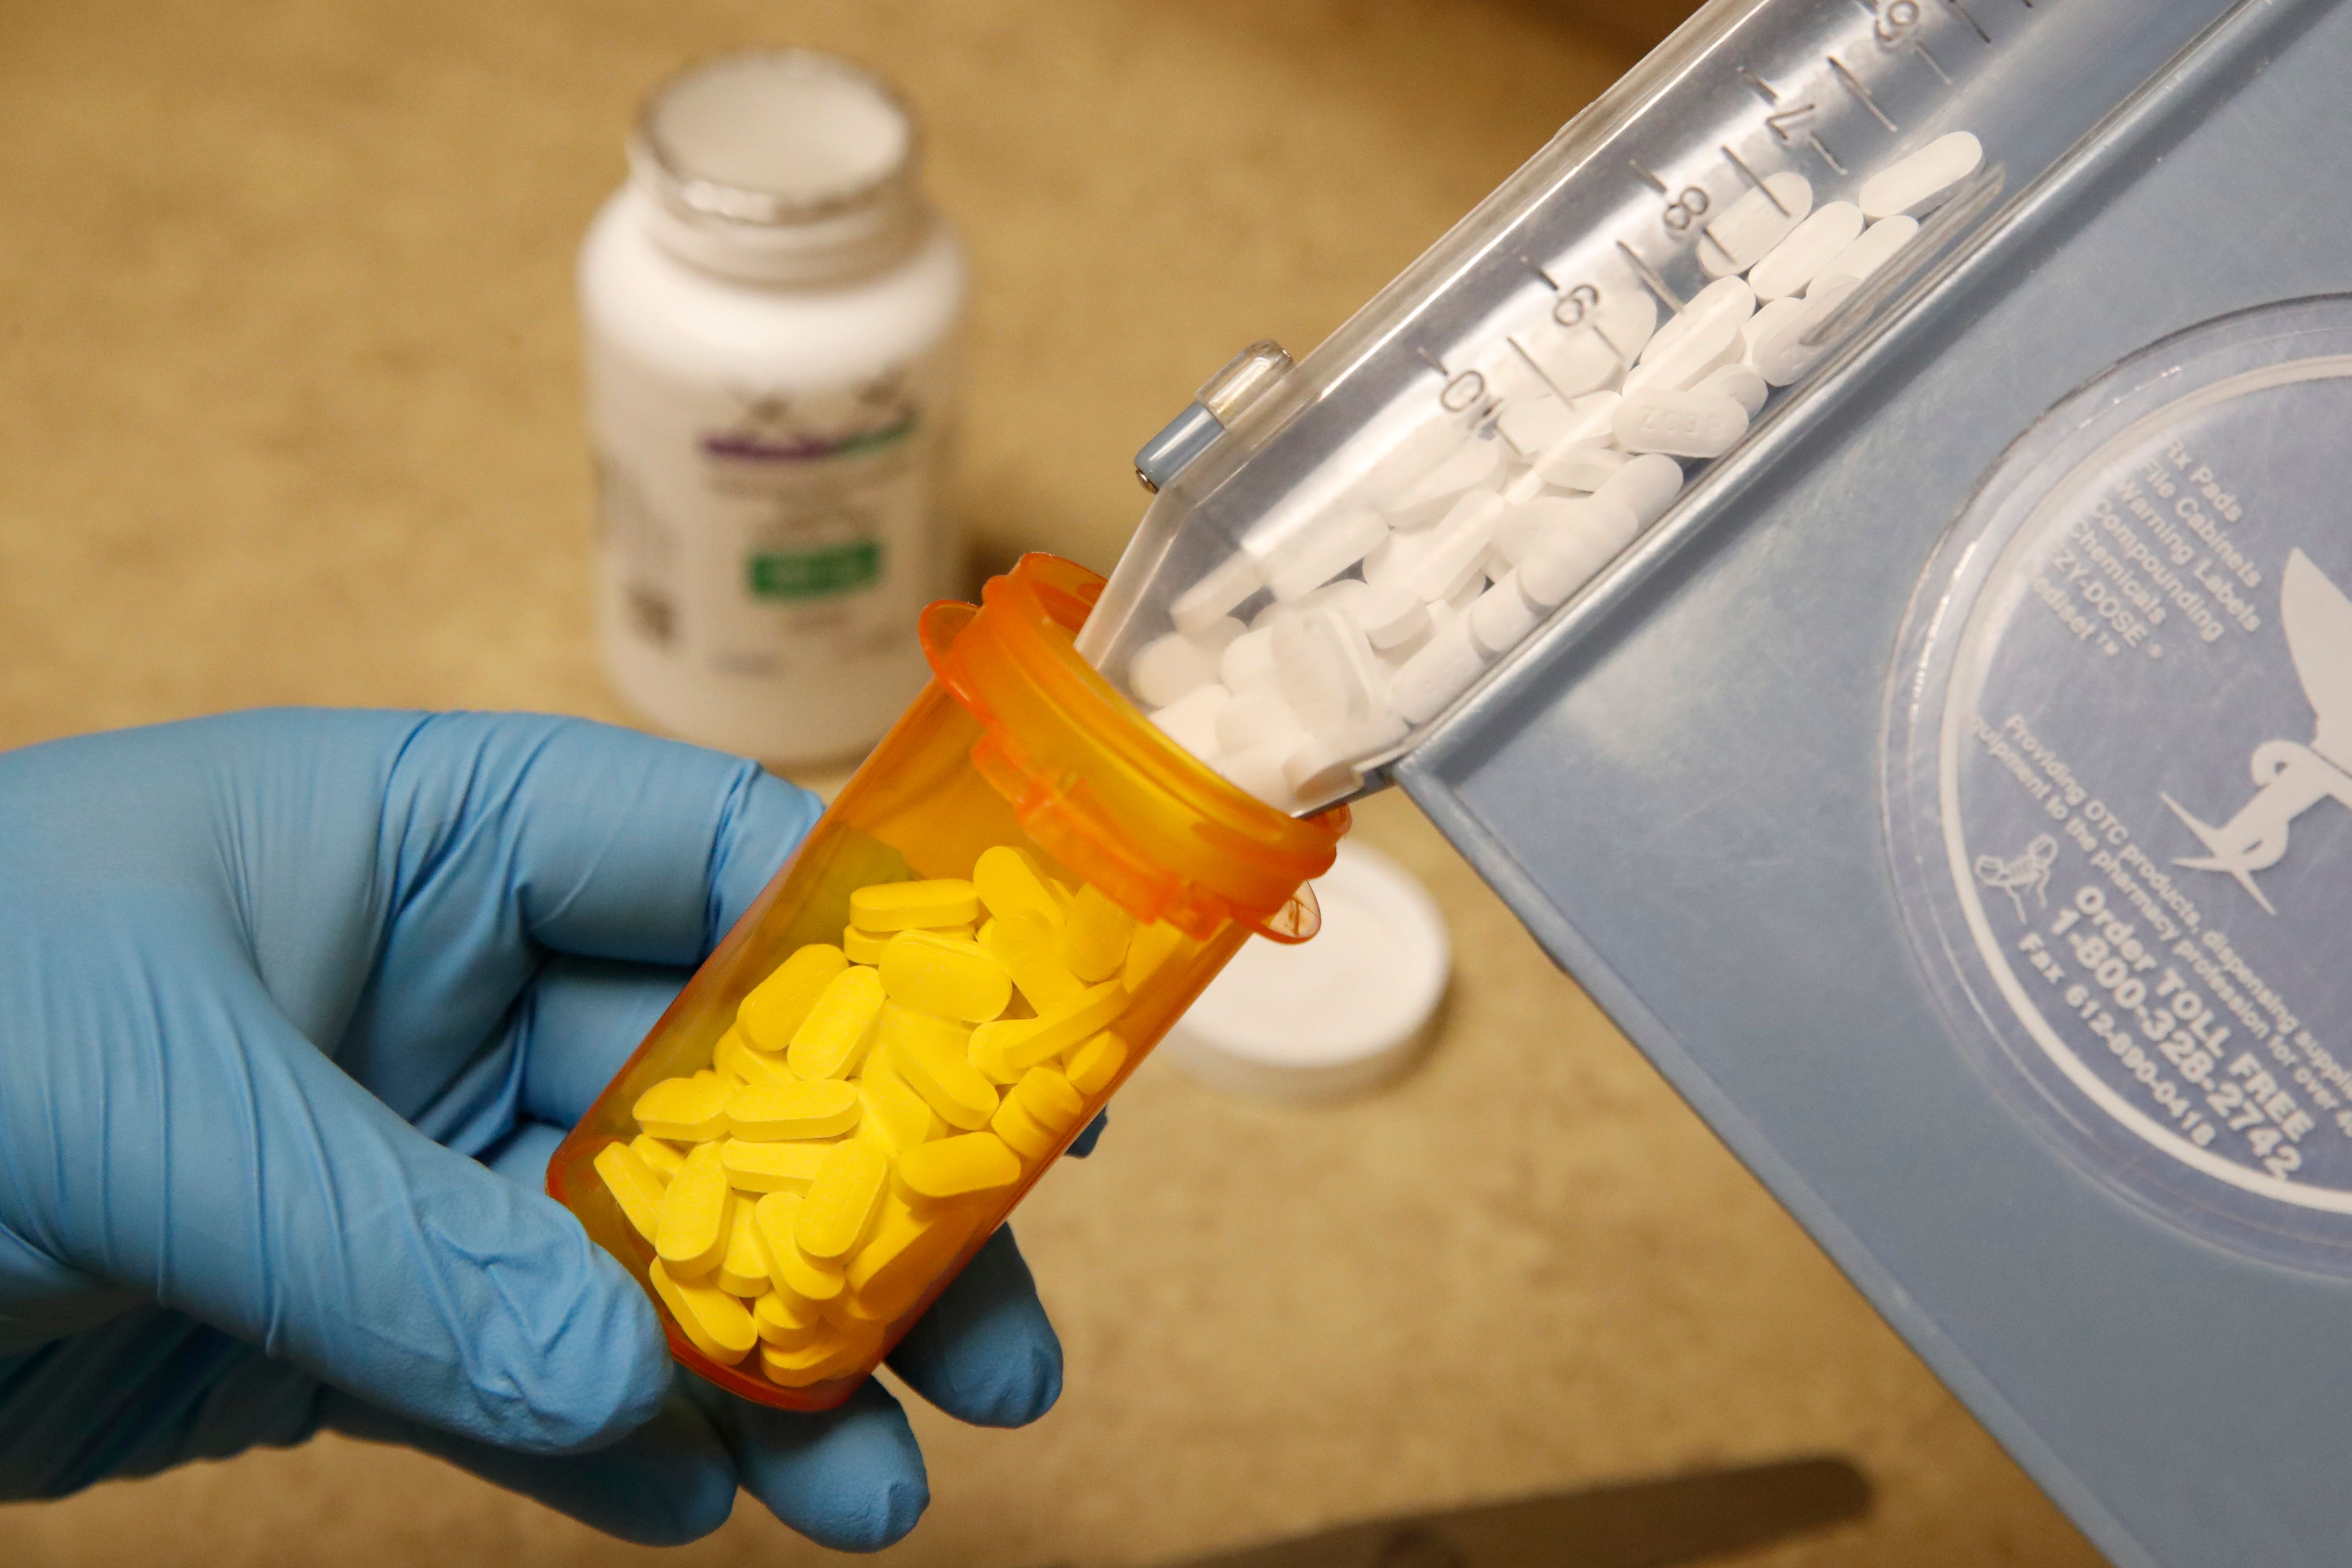 A pharmacy tech puts pills of Hydroxychloroquine in a bottle at Rock Canyon Pharmacy in Provo, Utah, on May 20, 2020. (GEORGE FREY/AFP via Getty Images)